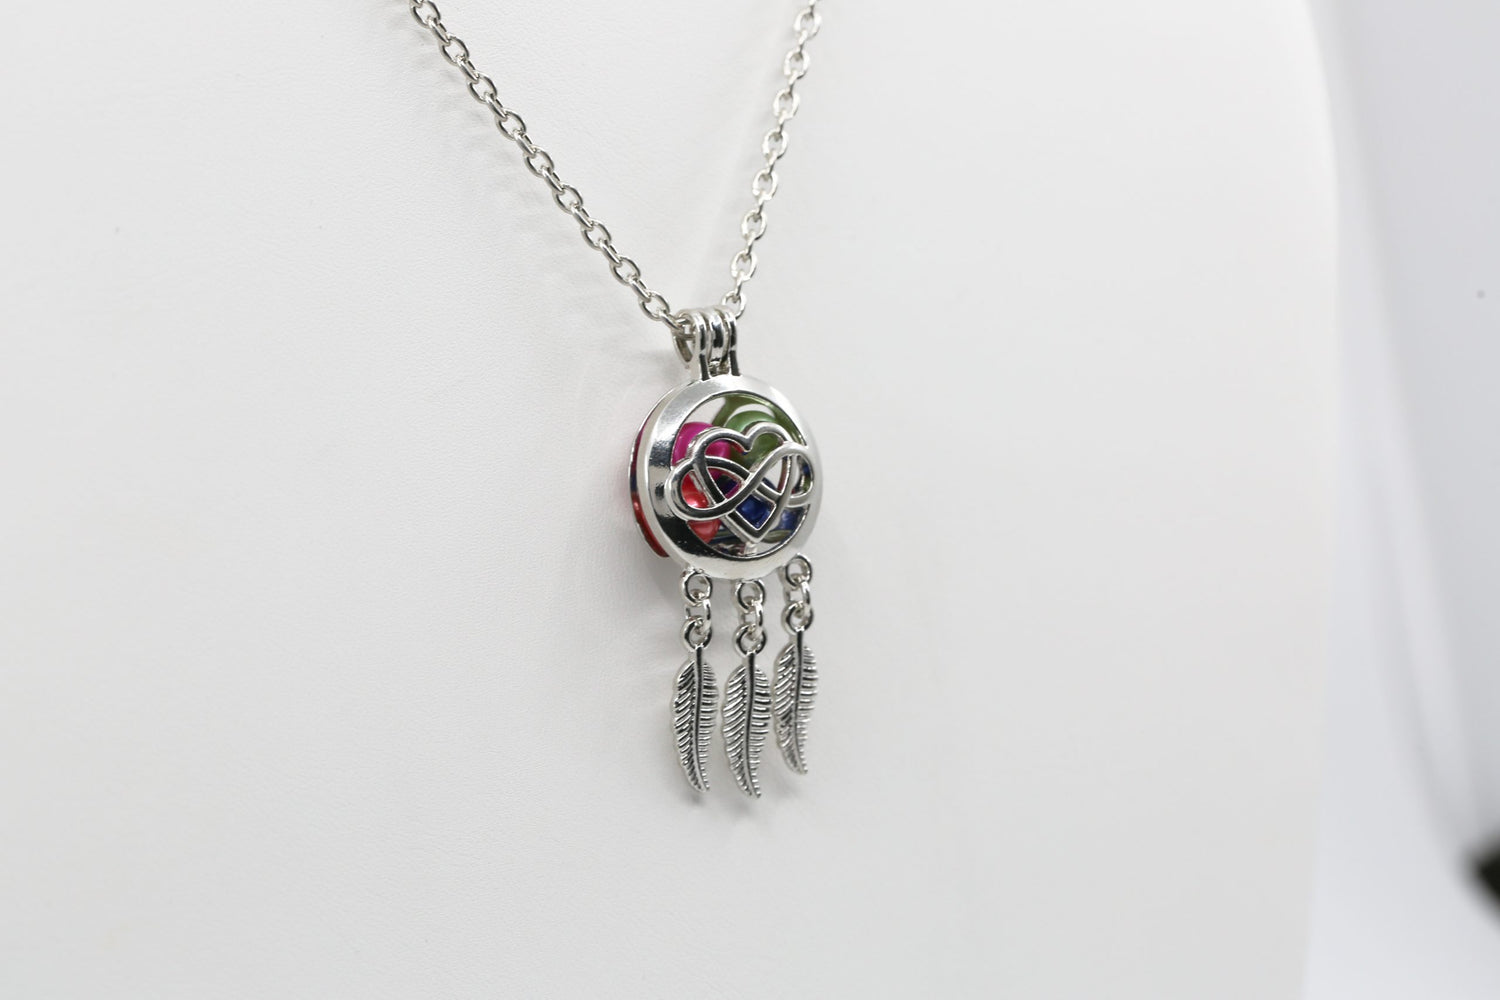 Cage Pendant Silver Plated - Dreamcatcher Infinity Heart